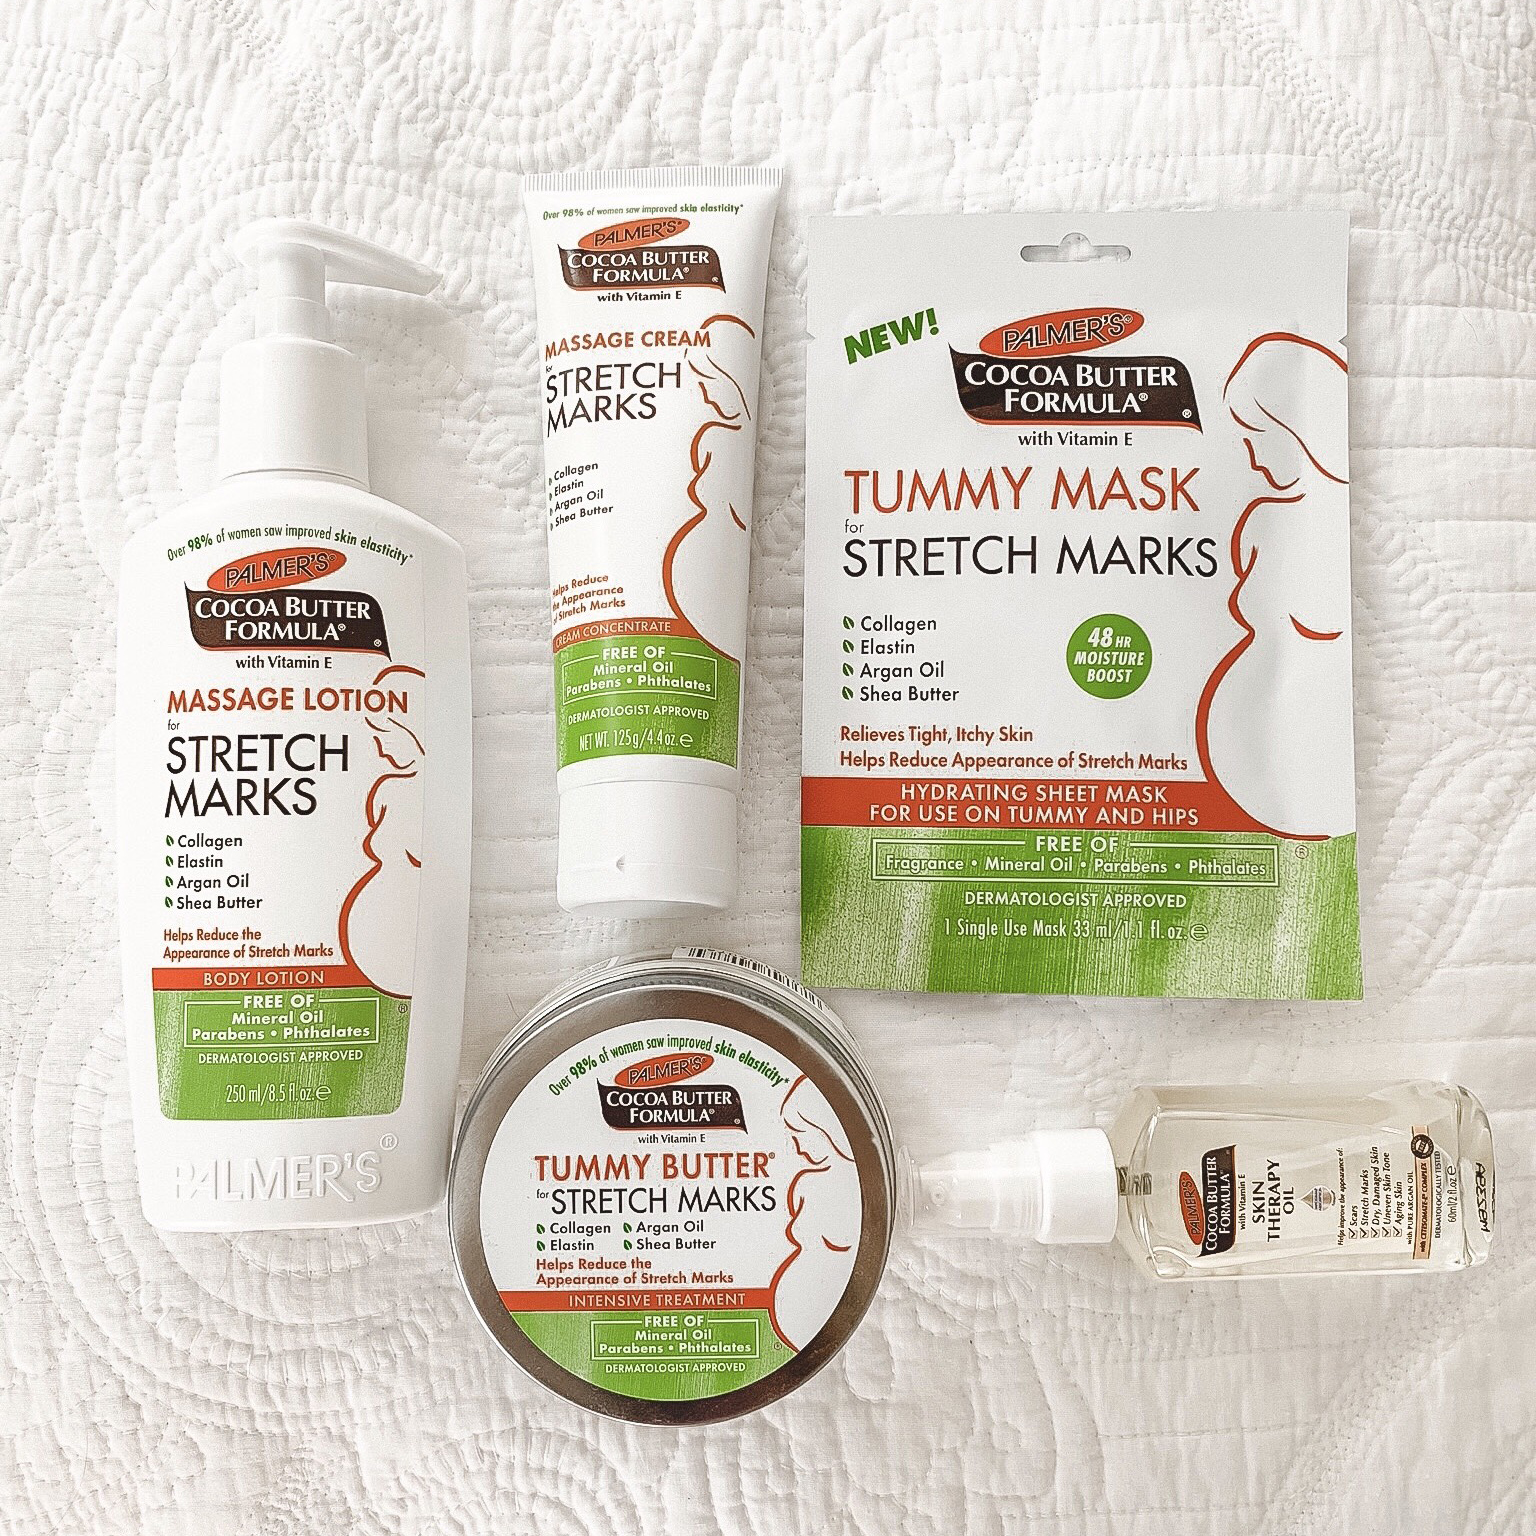 Palmer's Cocoa Butter For Pregnancy Stretch Marks Collection